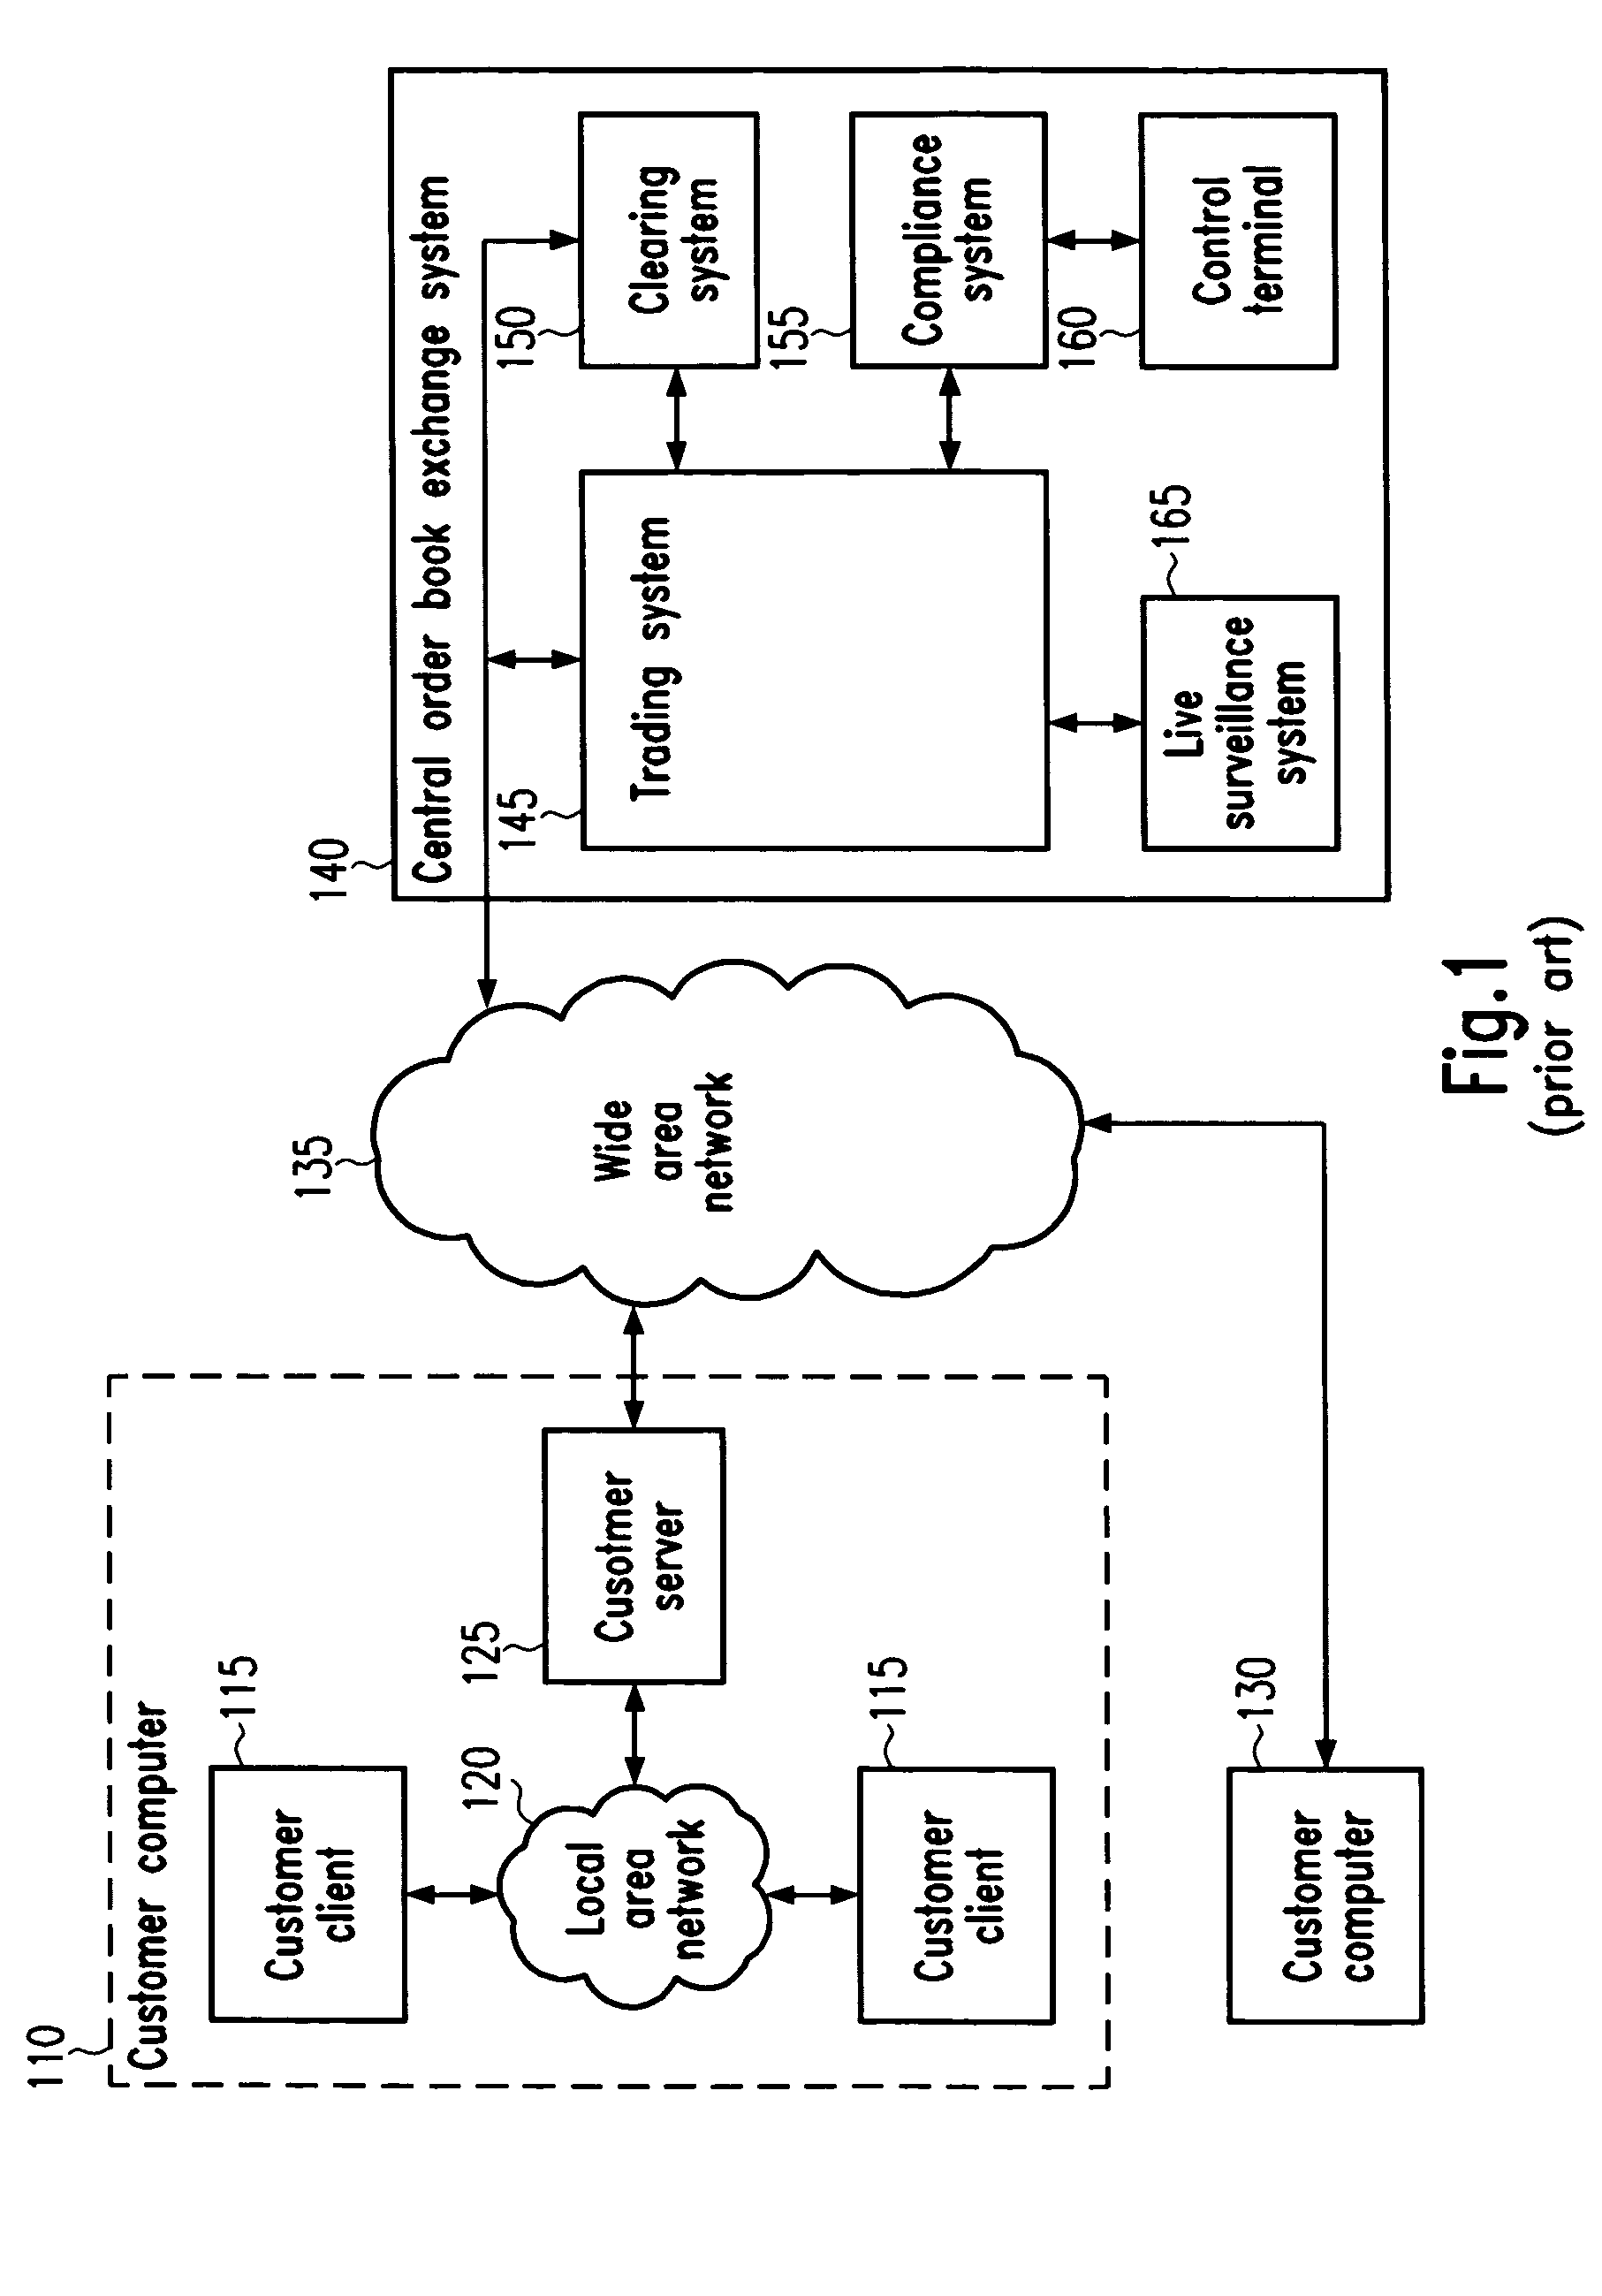 Integrated order matching system combining visible and hidden parameters